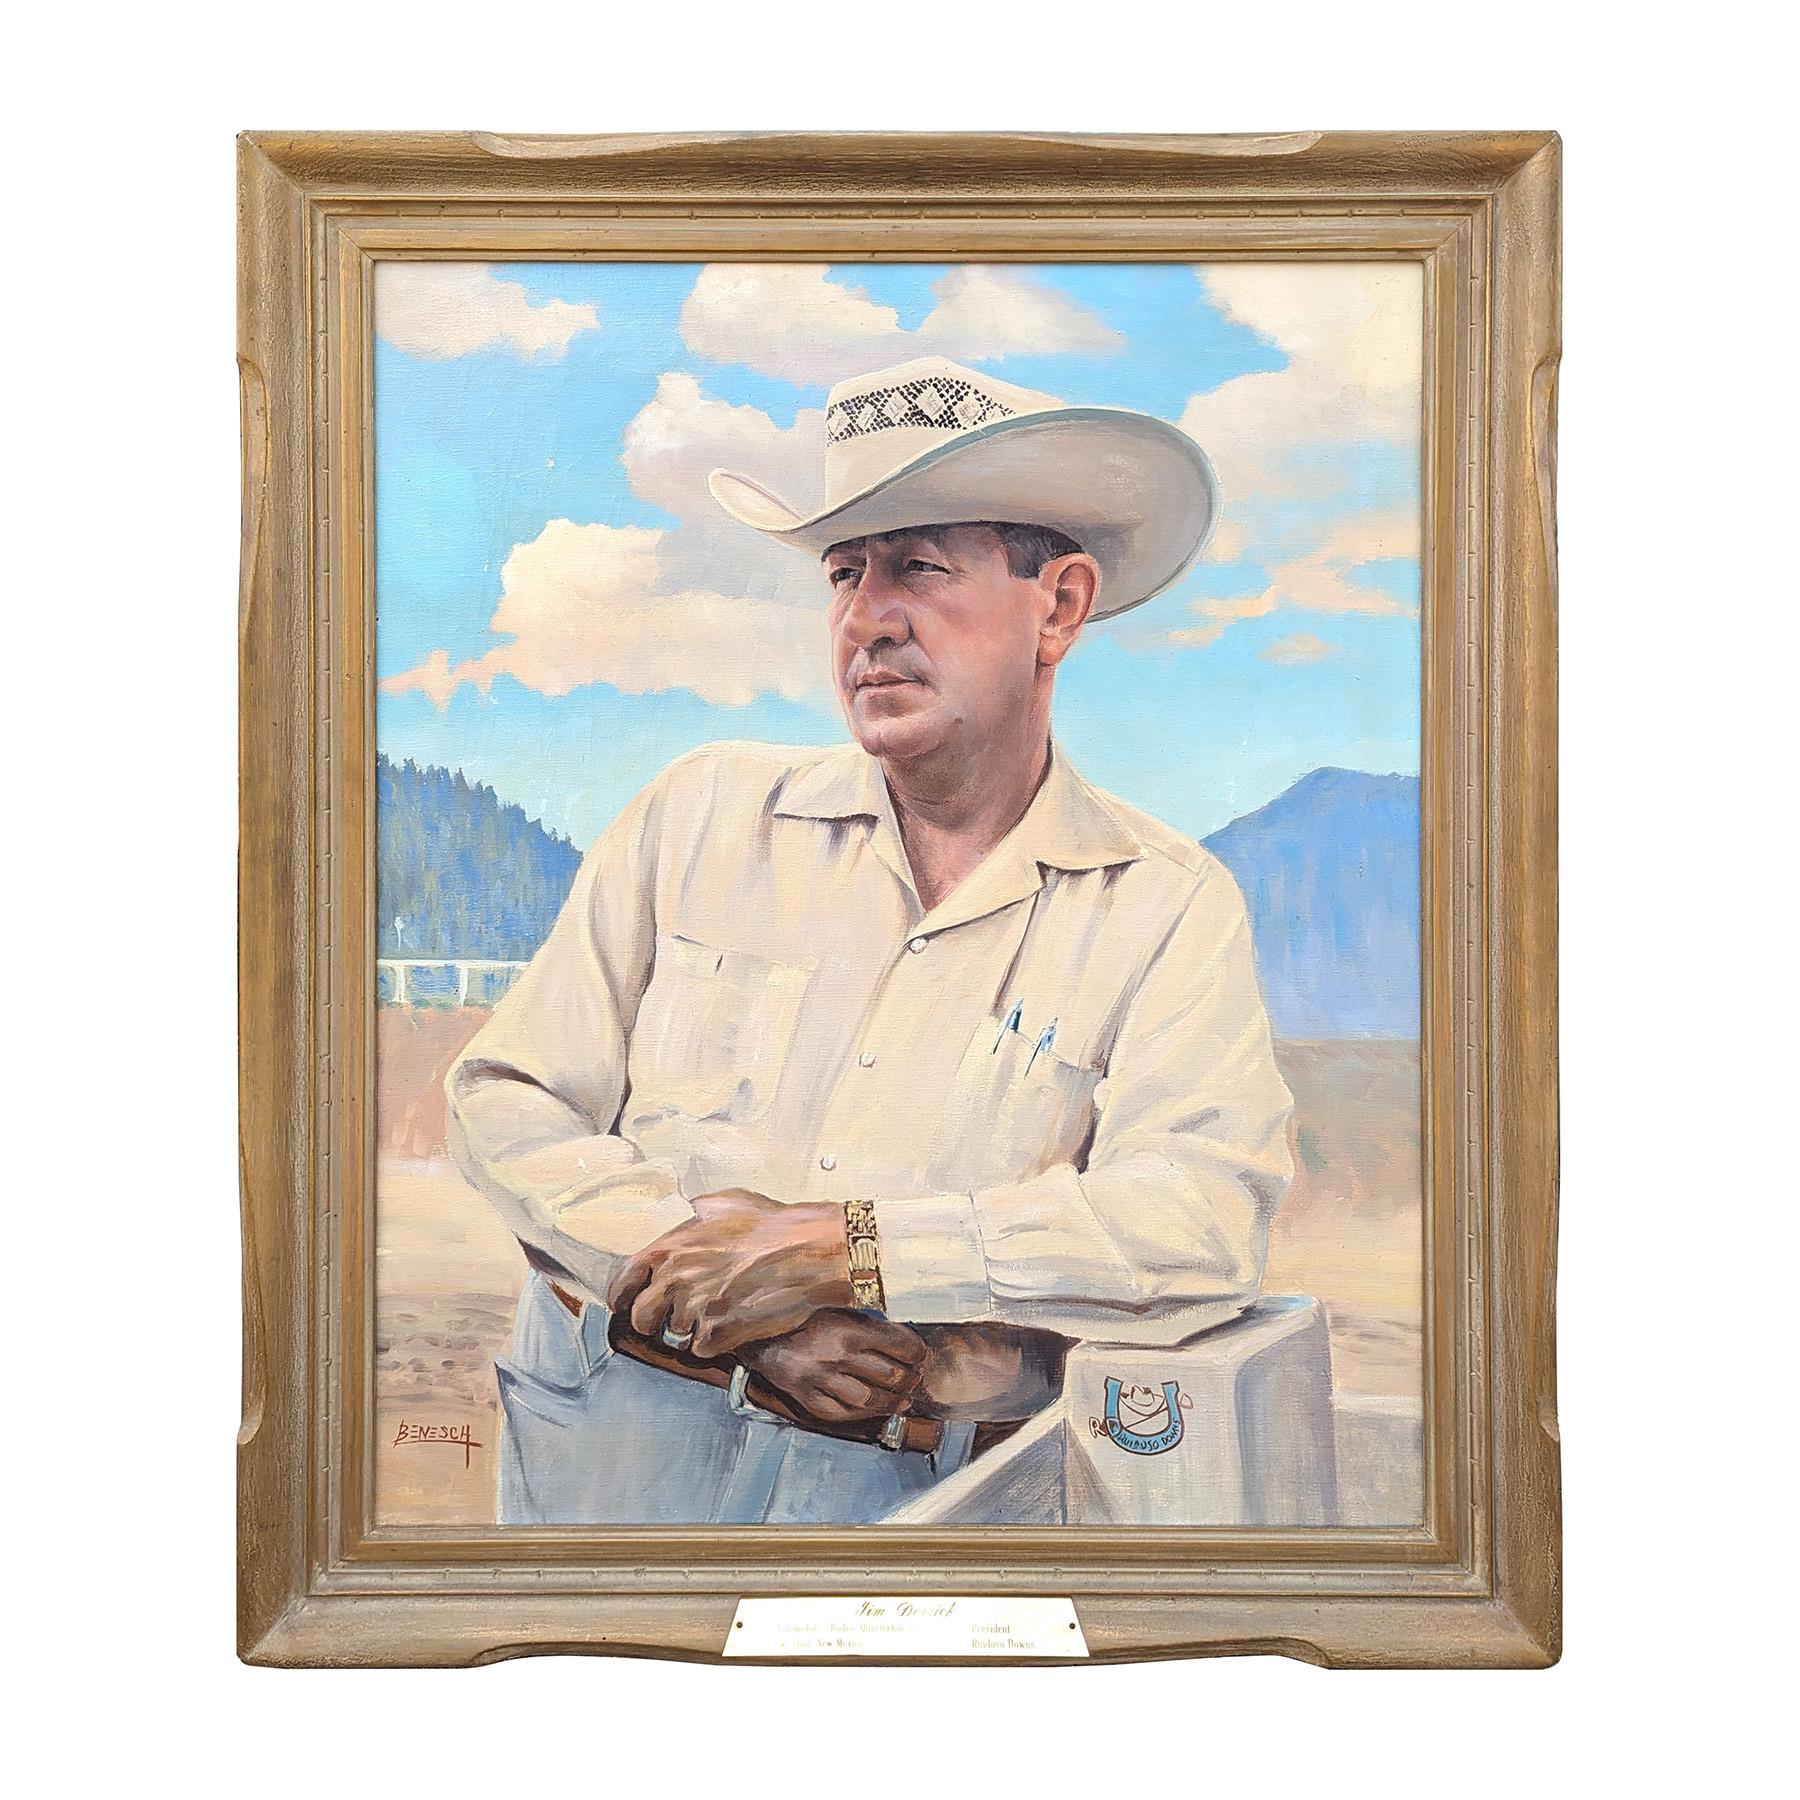 Naturalistic Cowboy Portrait of Jim Derrick Roidosa Downs Carlsbad, New Mexico - Painting by Lou Benesch